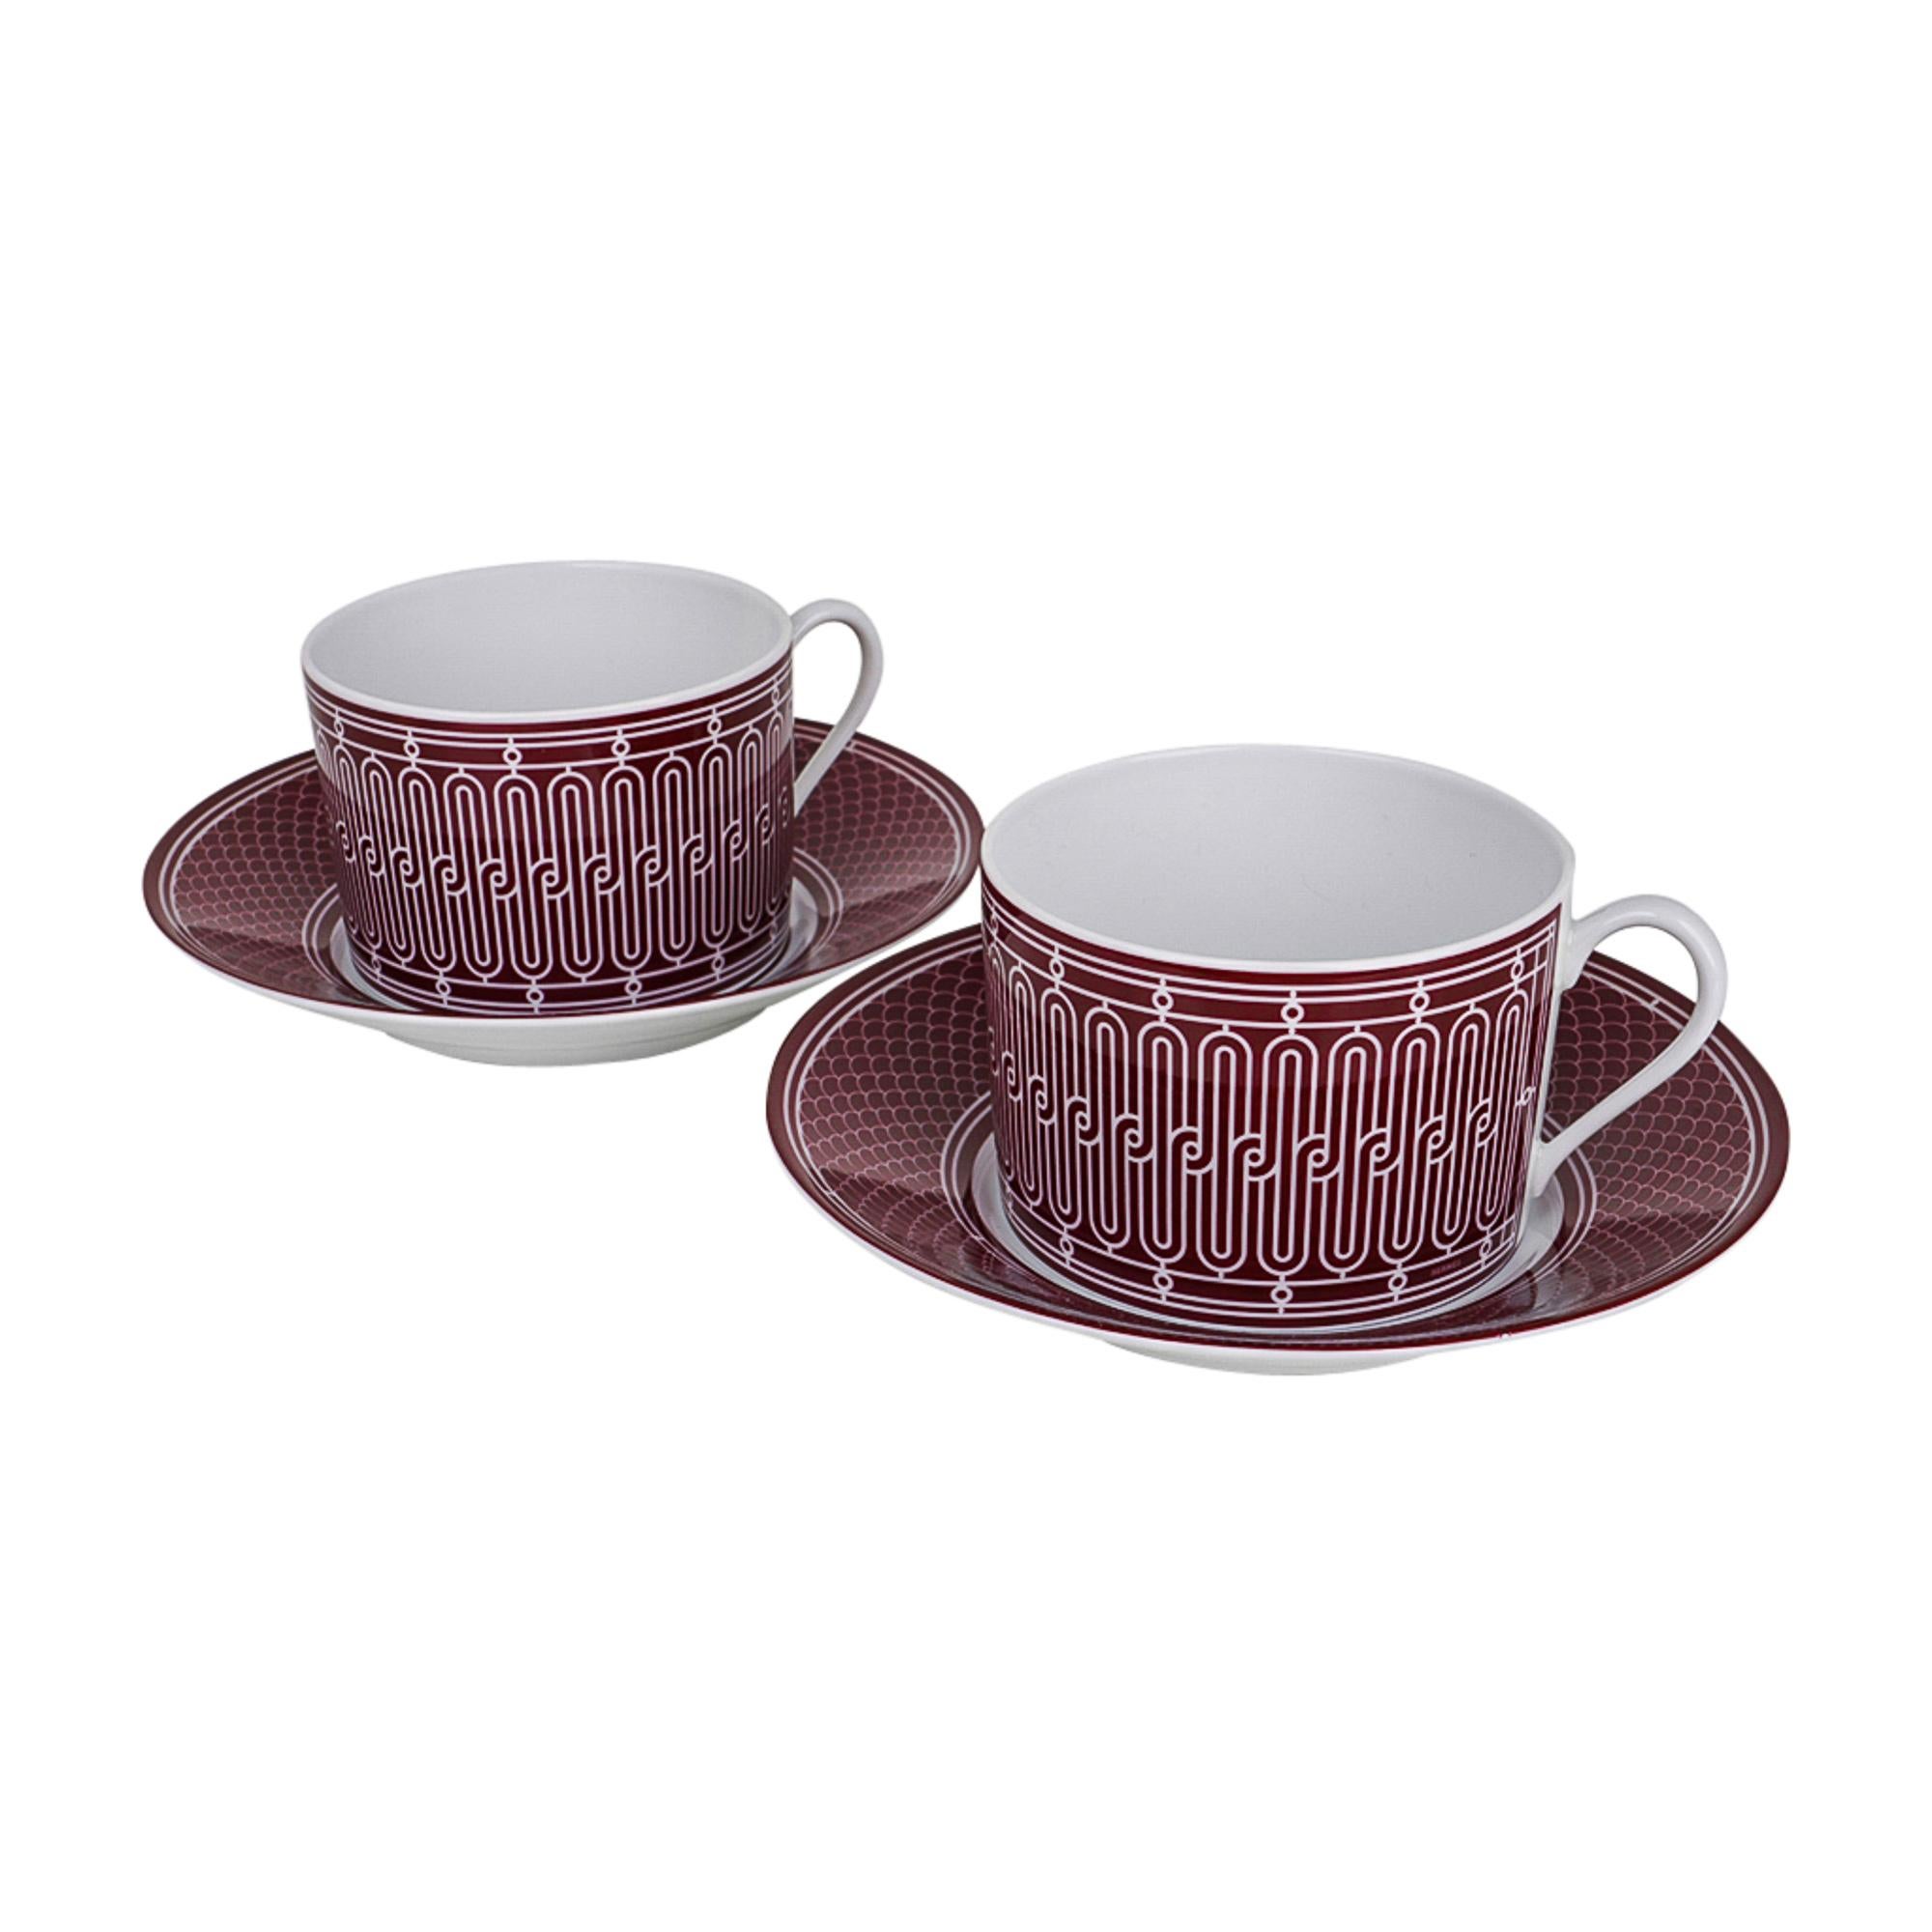 Brown Hermes H Deco Rouge Tea Cup and Saucer Porcelain Set of 2 New w/ Box For Sale